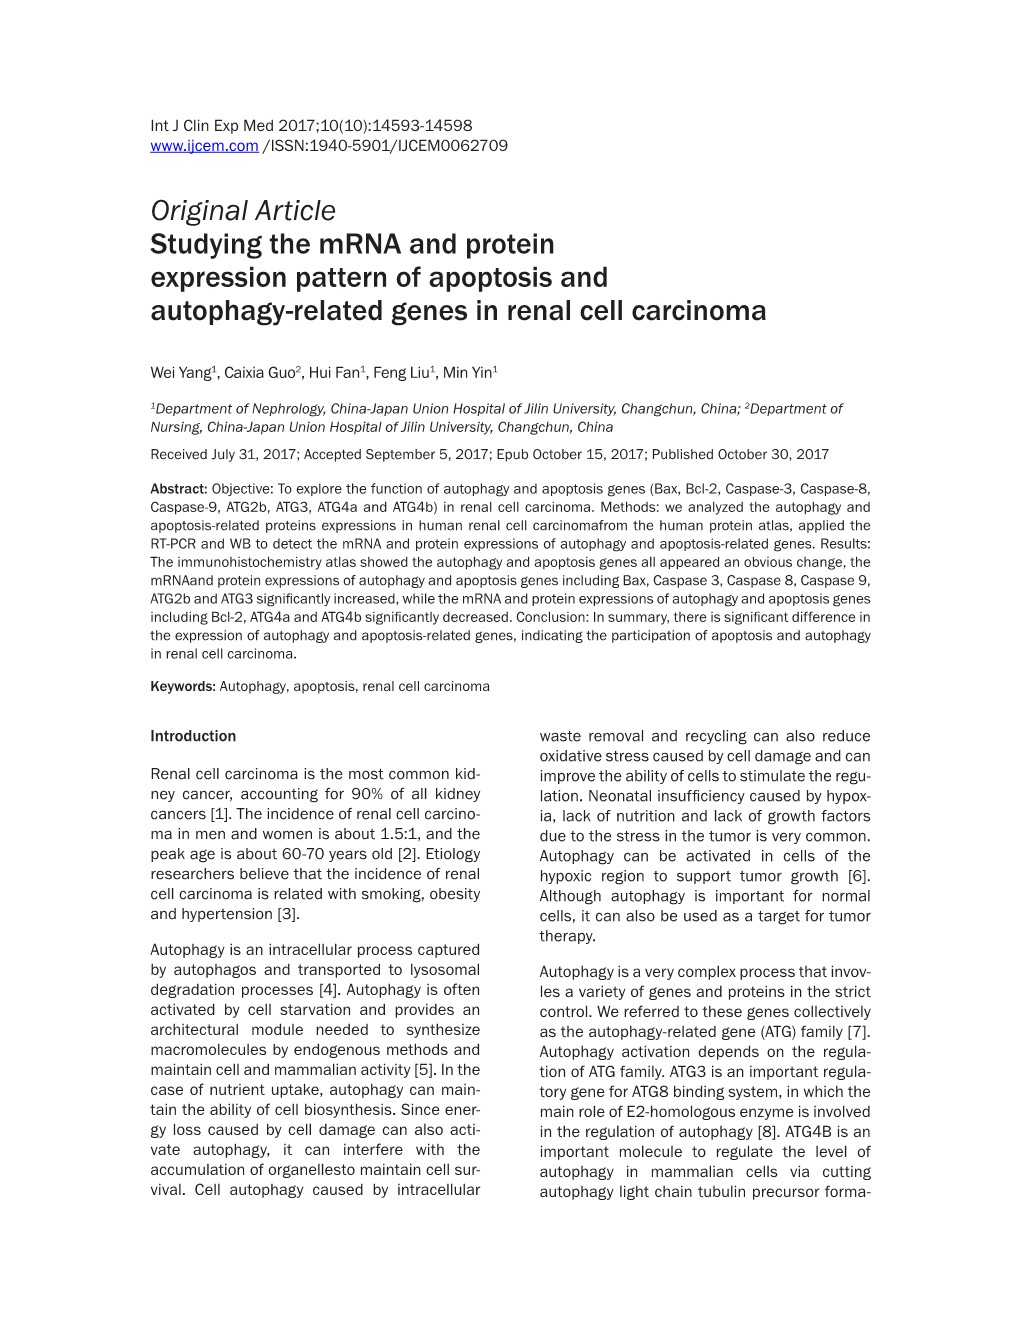 Original Article Studying the Mrna and Protein Expression Pattern of Apoptosis and Autophagy-Related Genes in Renal Cell Carcinoma